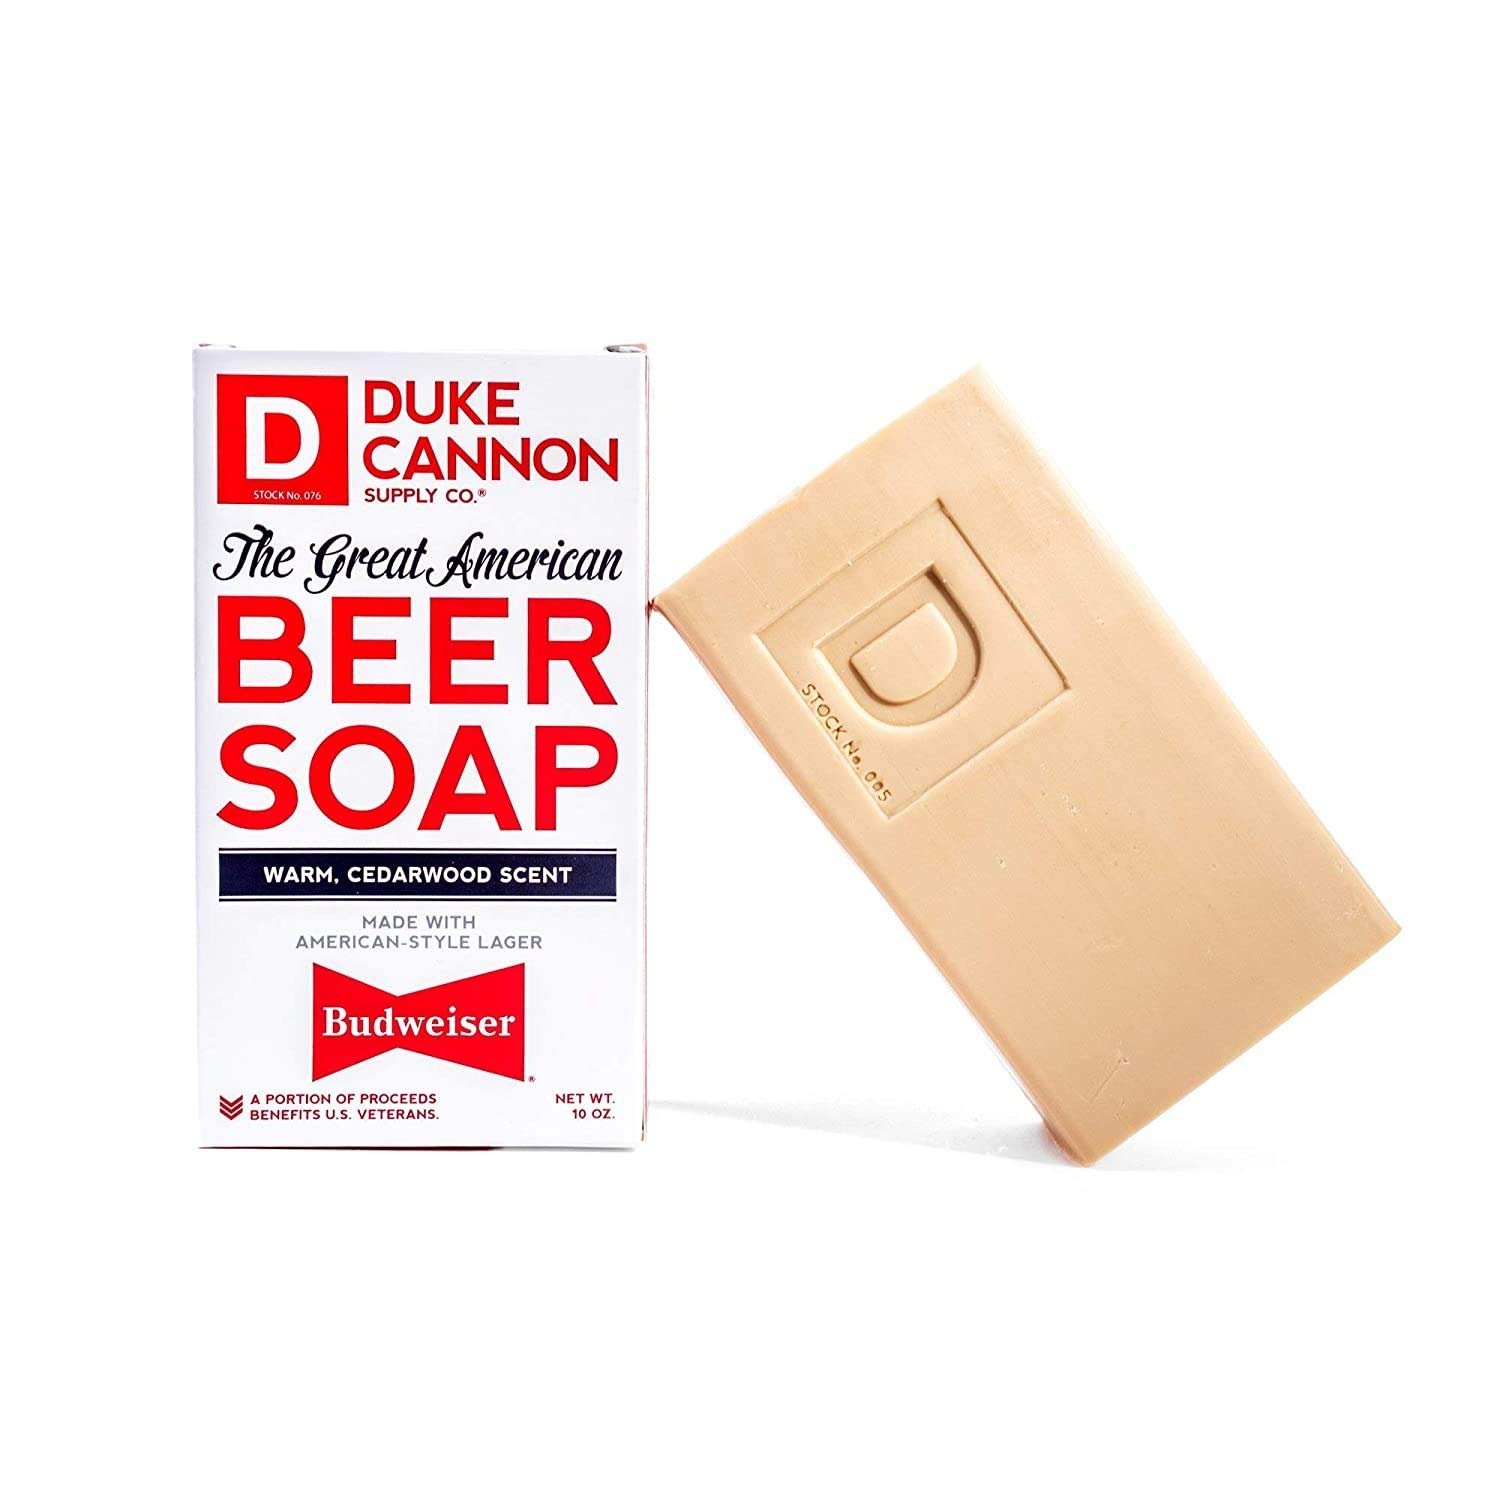 Duke Cannon Supply Co. Great American Beer Soap Bar for Men, 10 ounce / Made with Budweiser - image 1 of 2